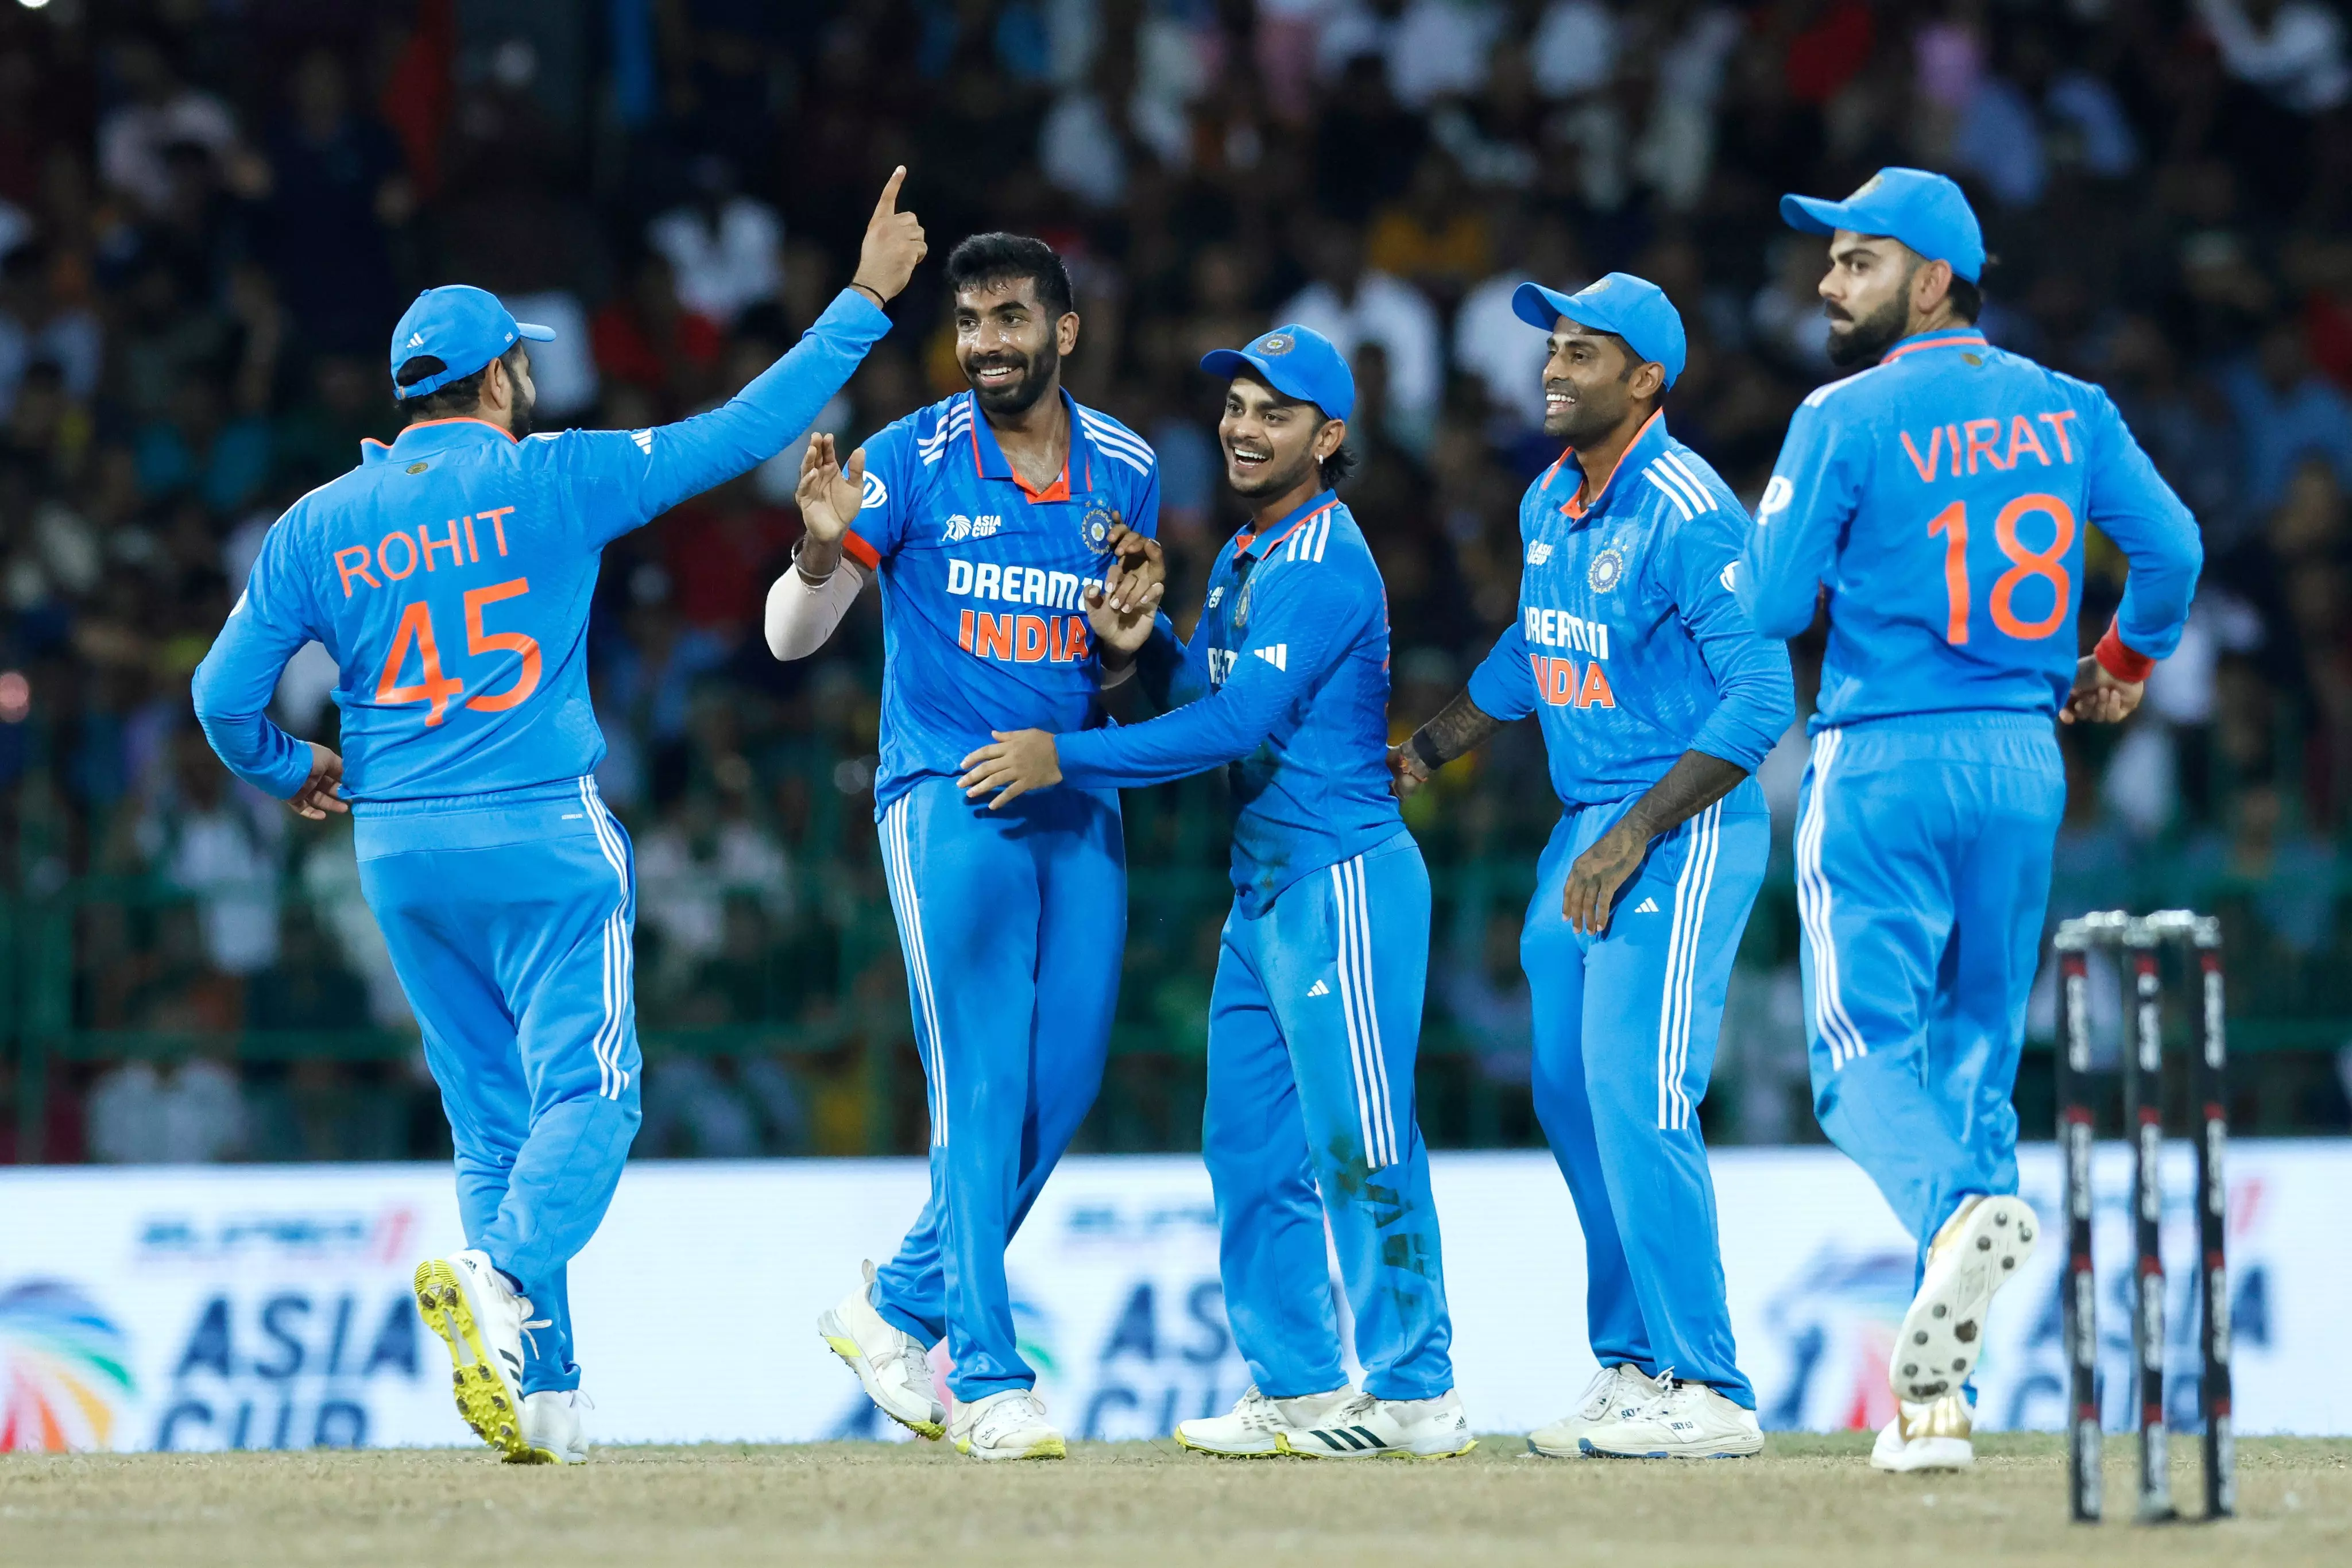 Asia Cup | Final with Sri Lanka India’s chance to end non-bilateral title drought